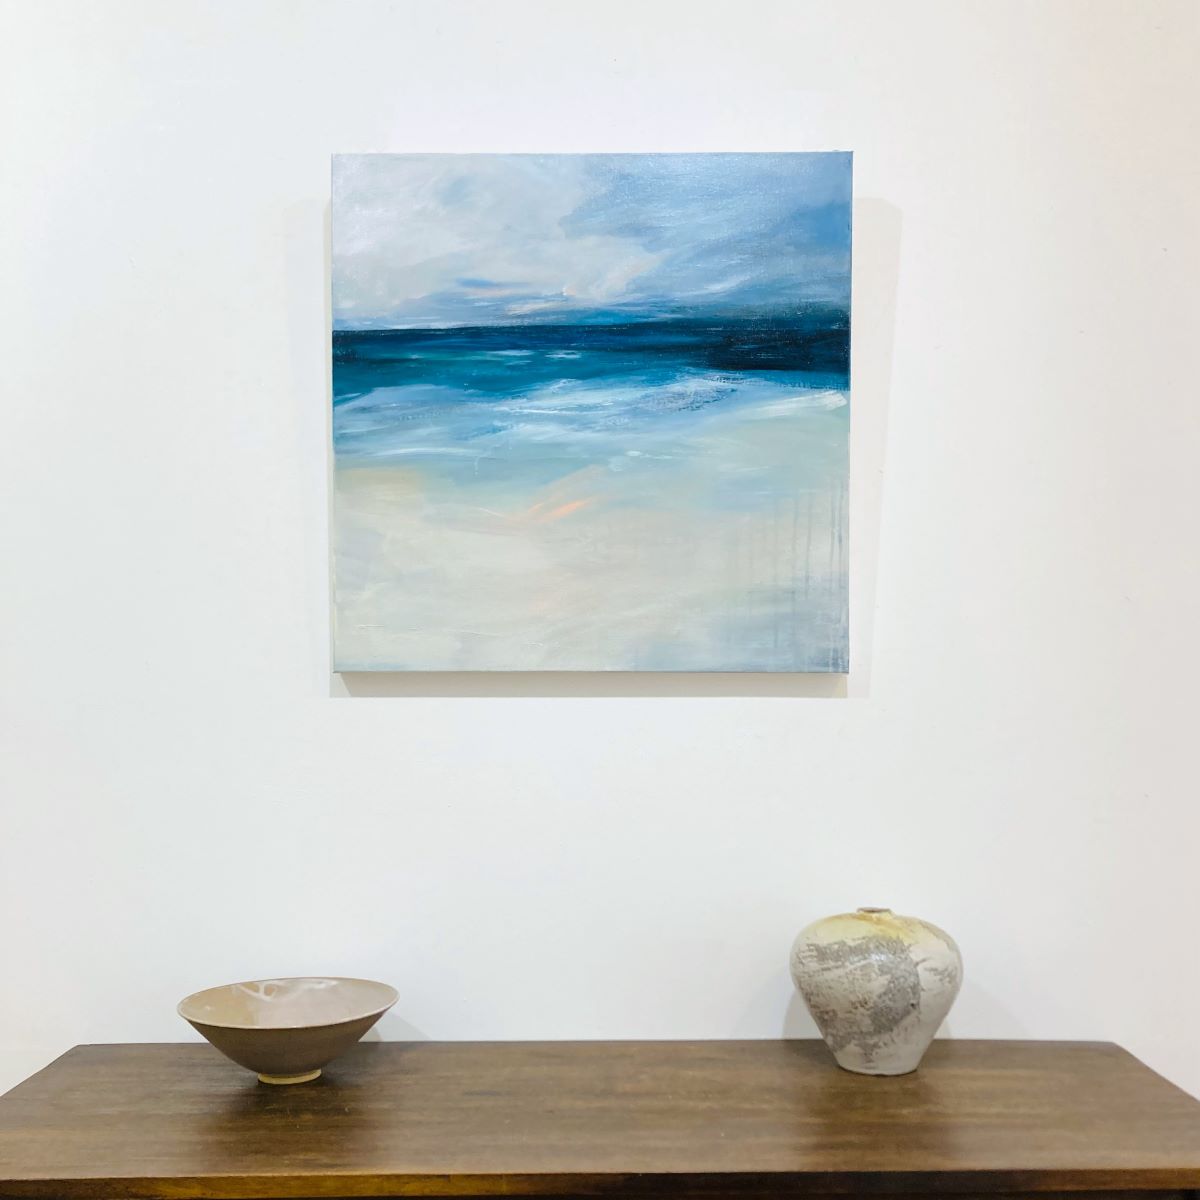 'Sounds of the Sea II' by artist Shona Harcus